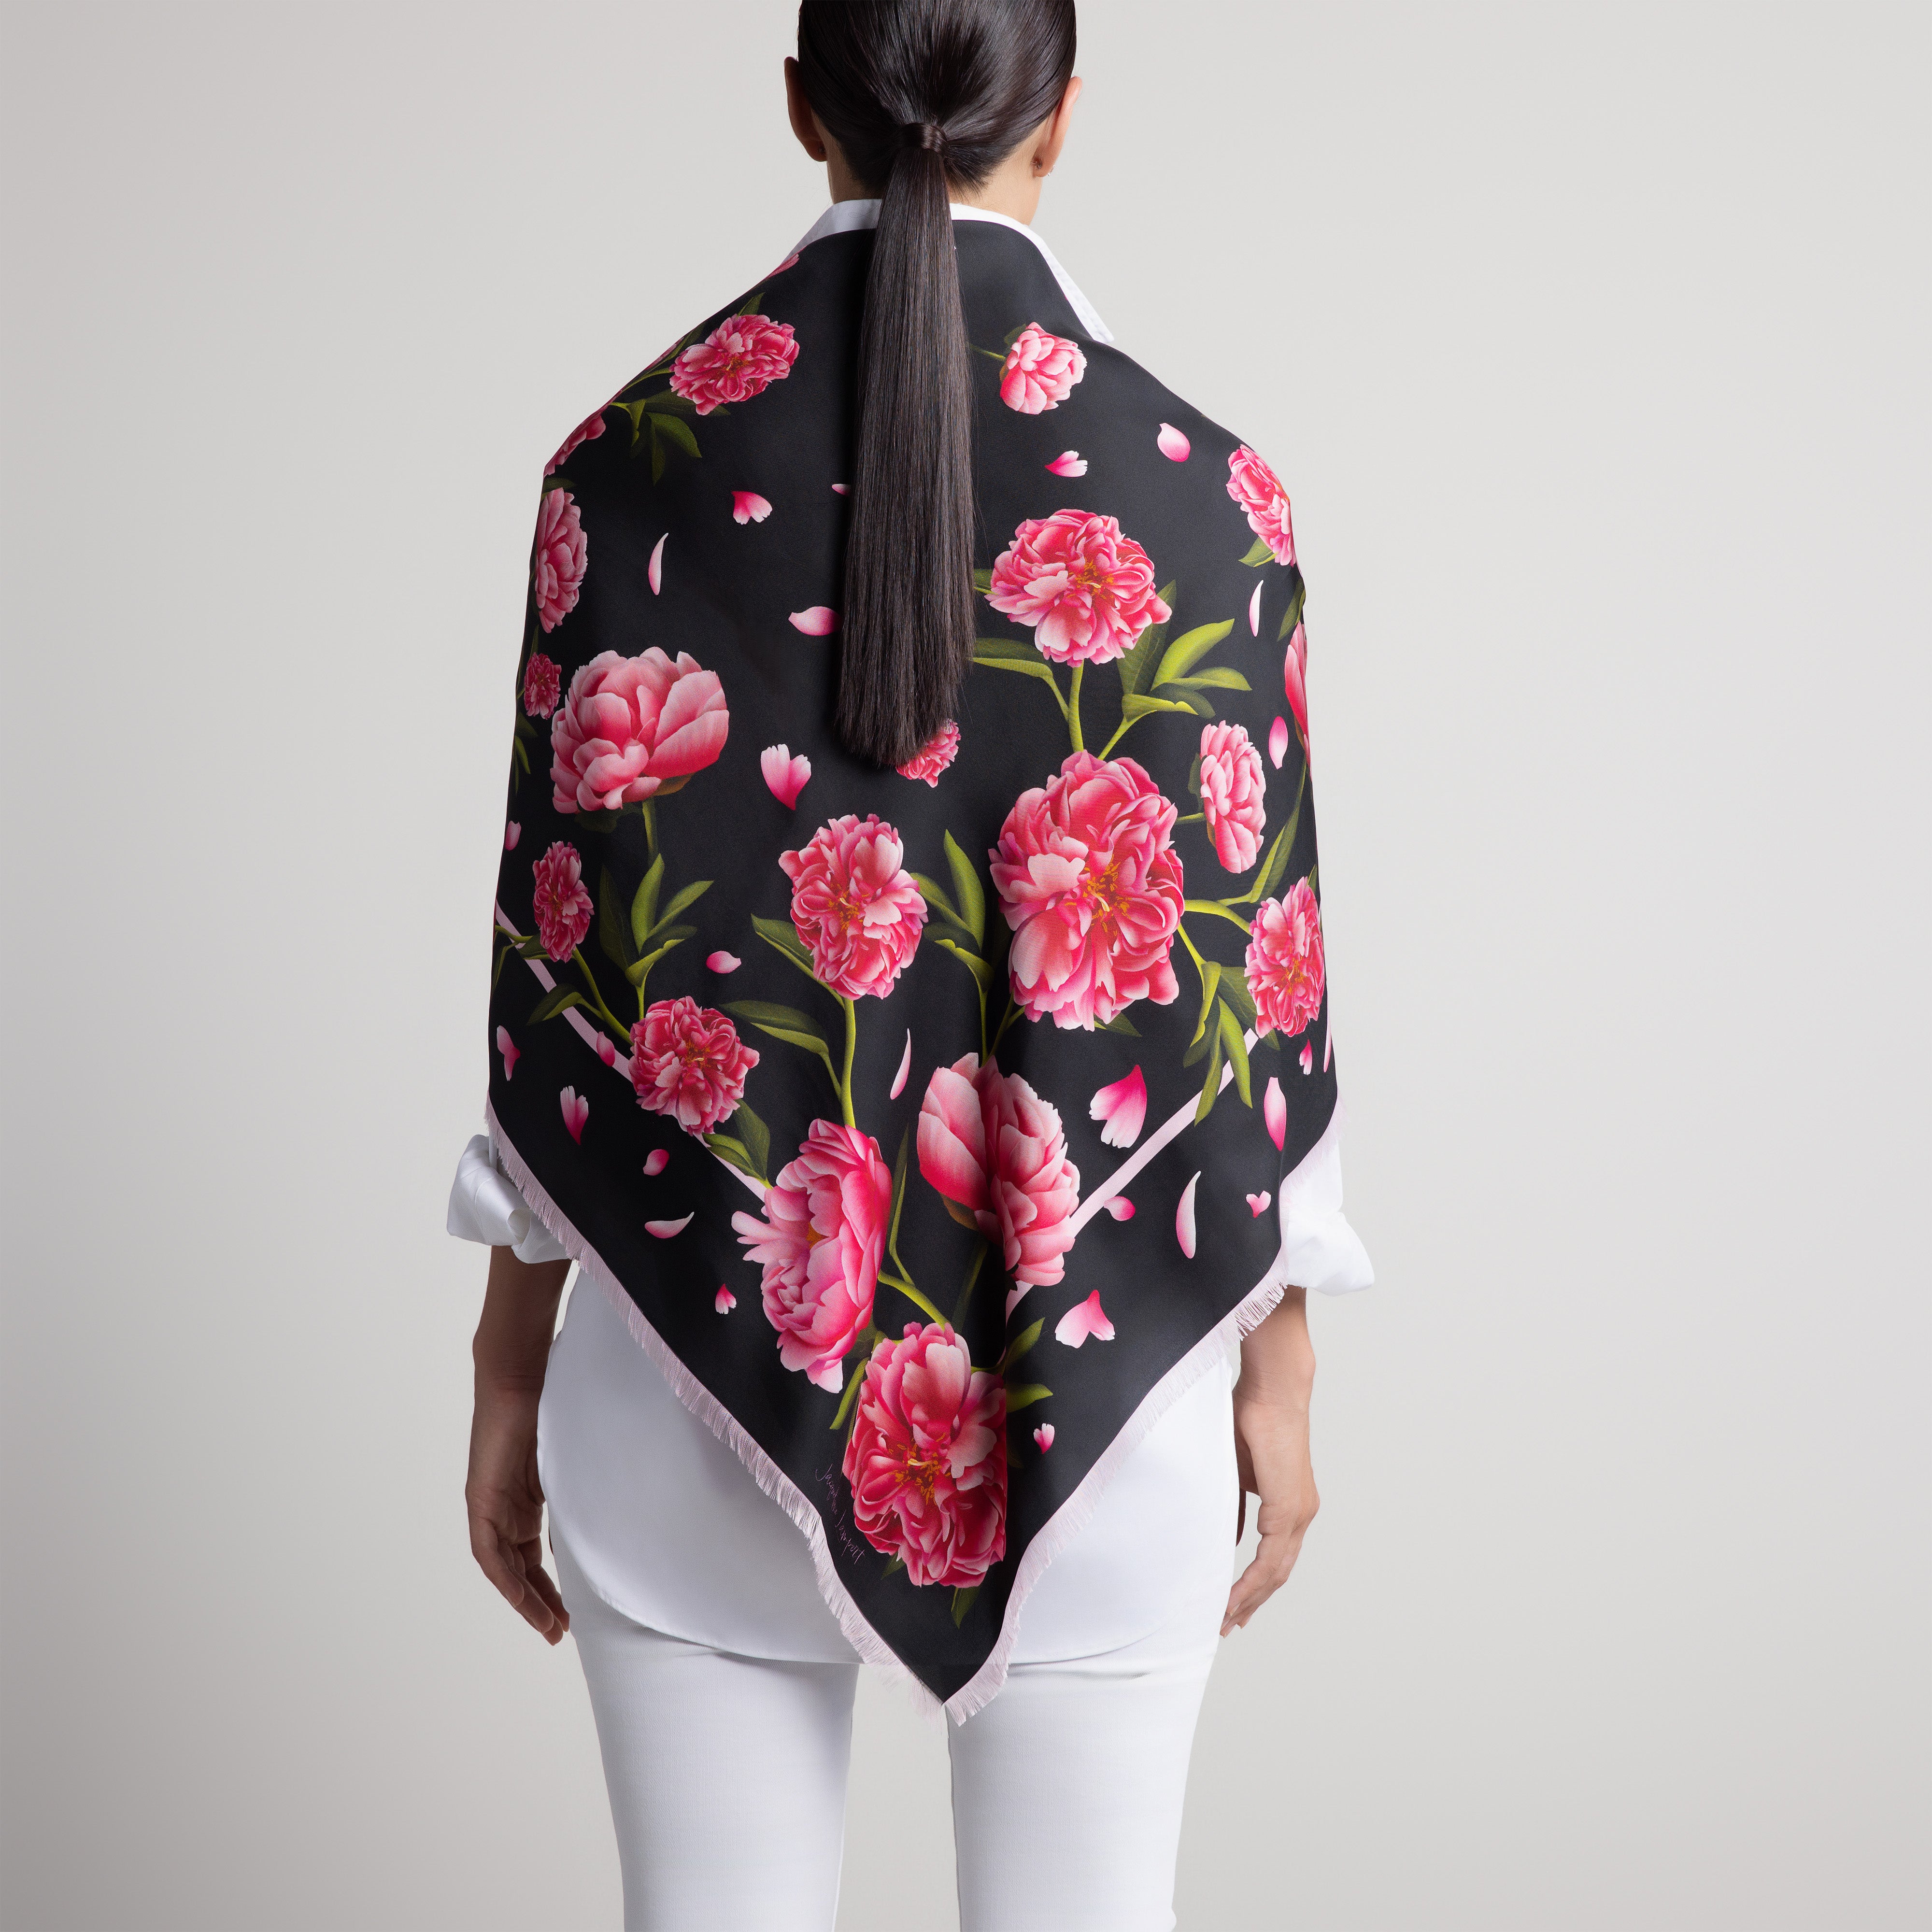 Peony Grande Silk Scarf in Black with Hand-Feathered Edges